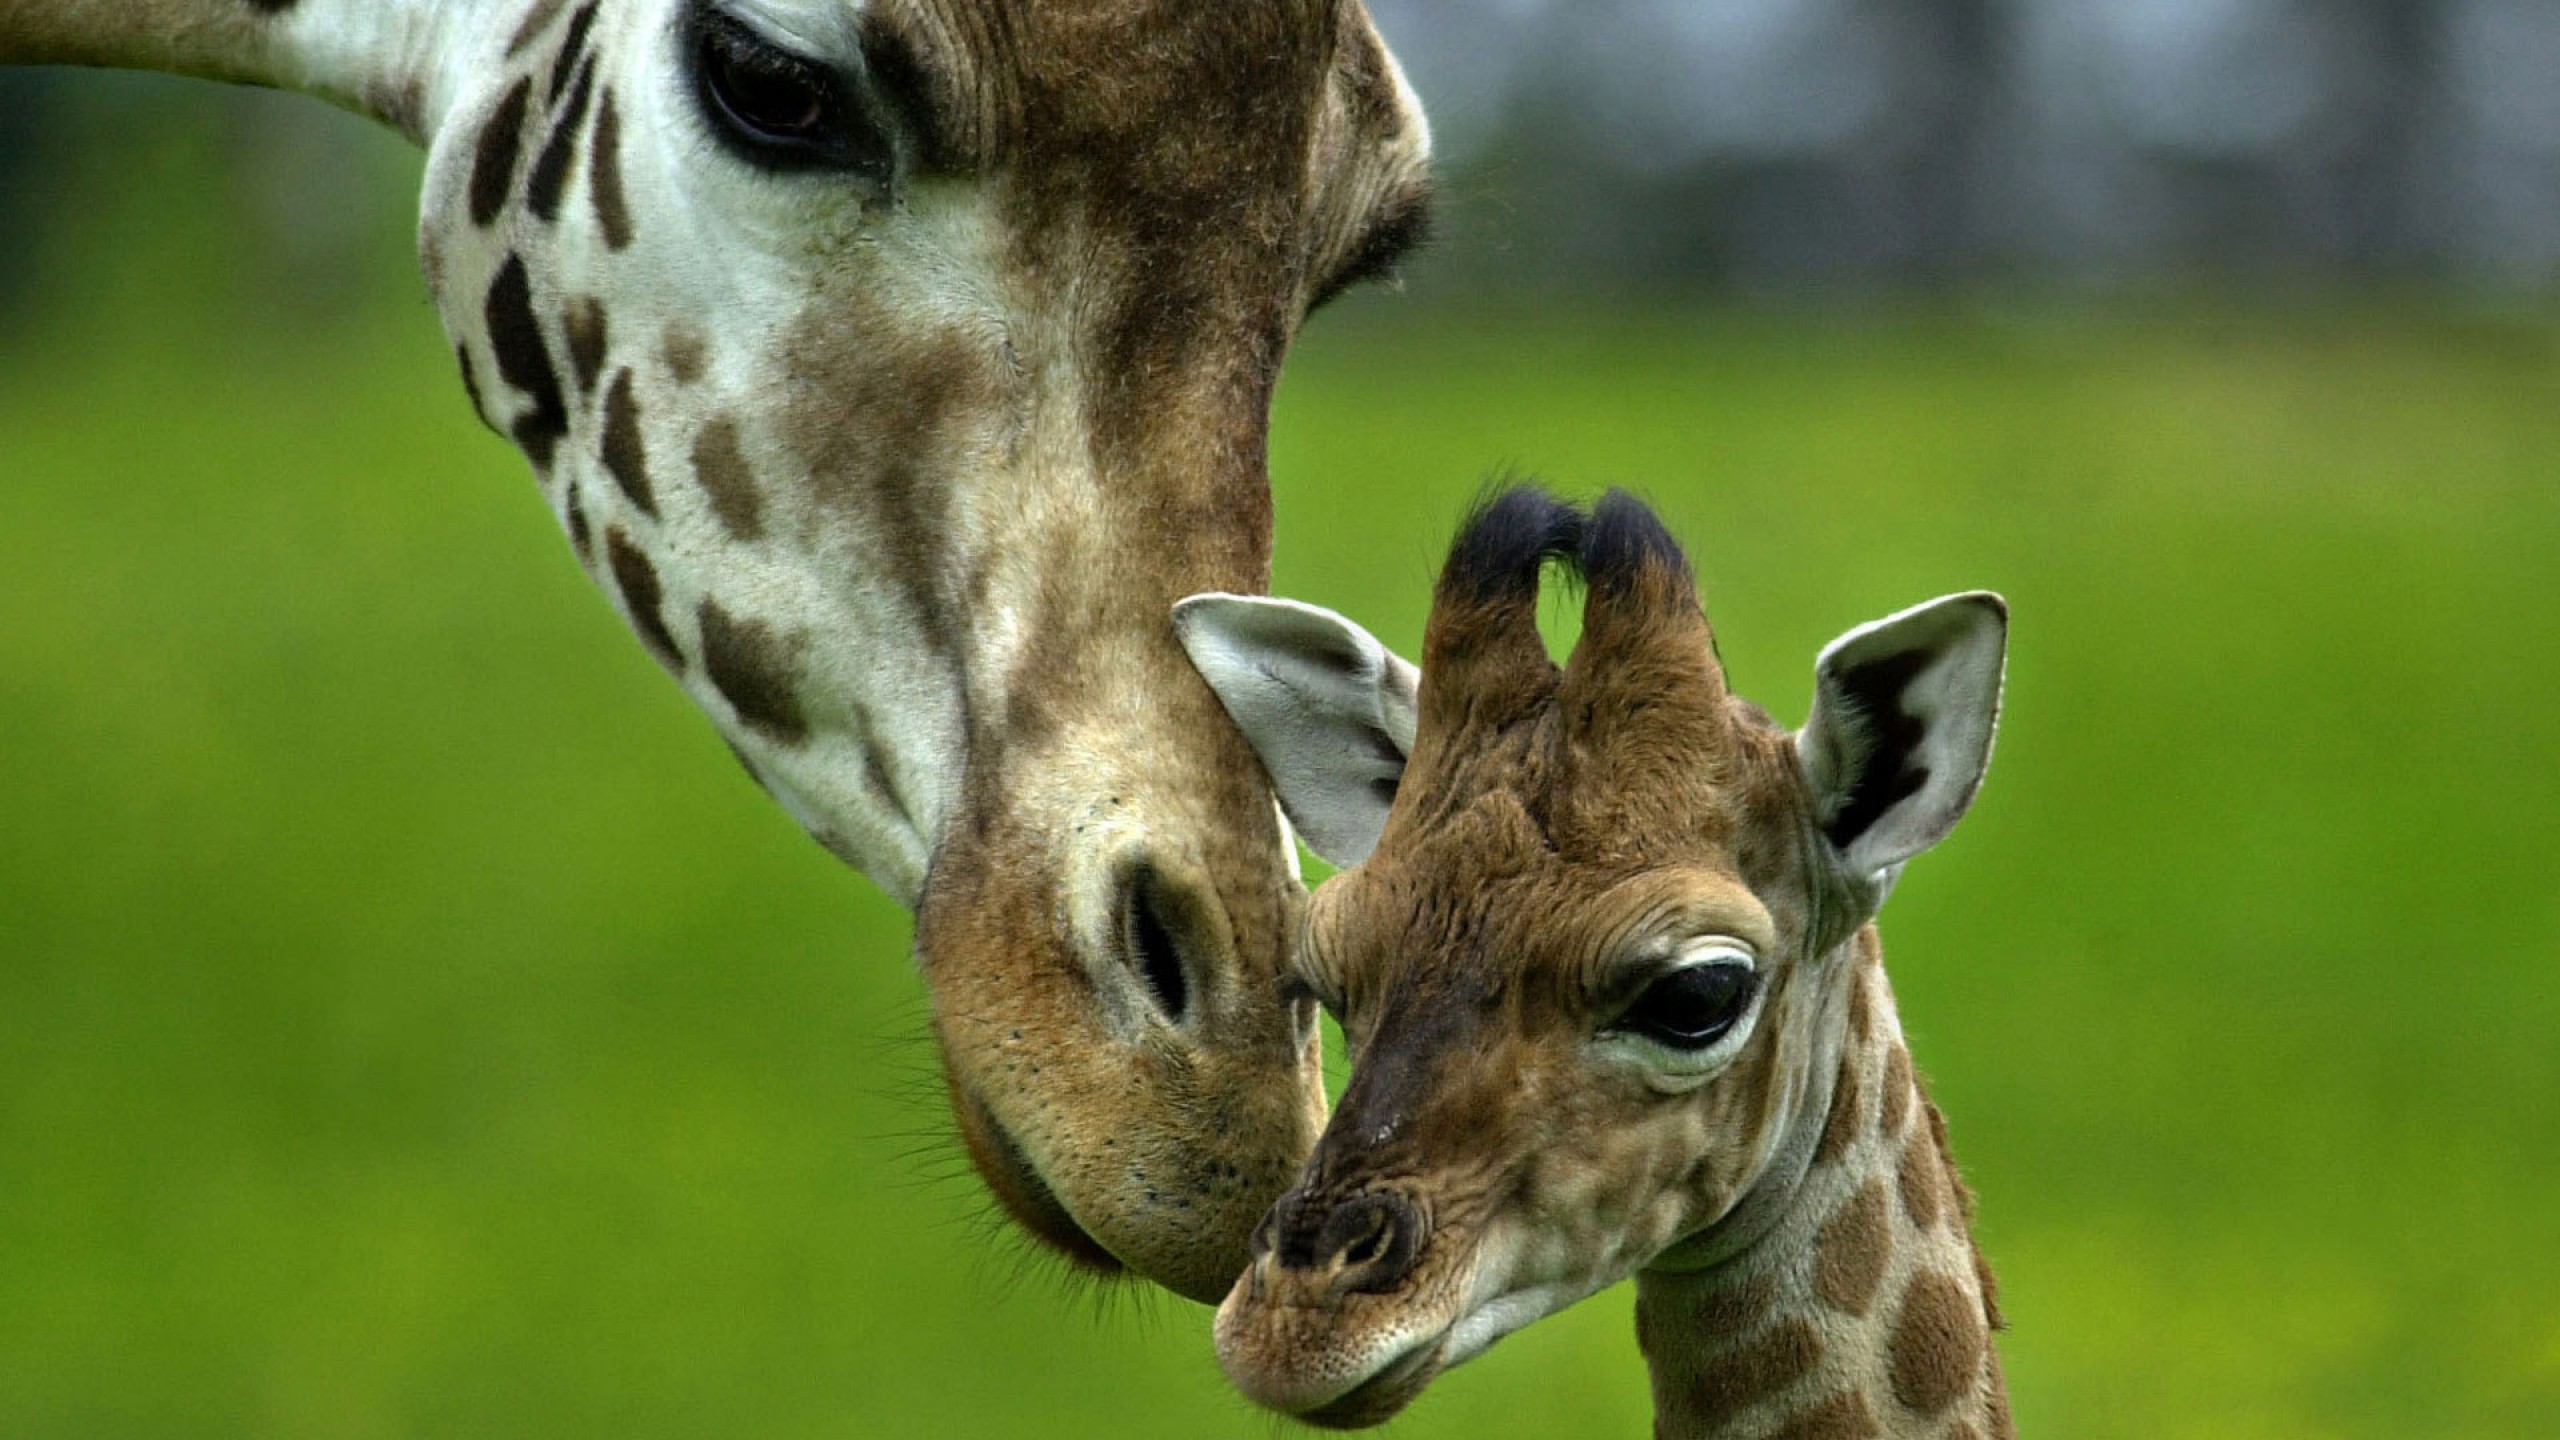 Image: Giraffe, couple, mother, baby, love, care